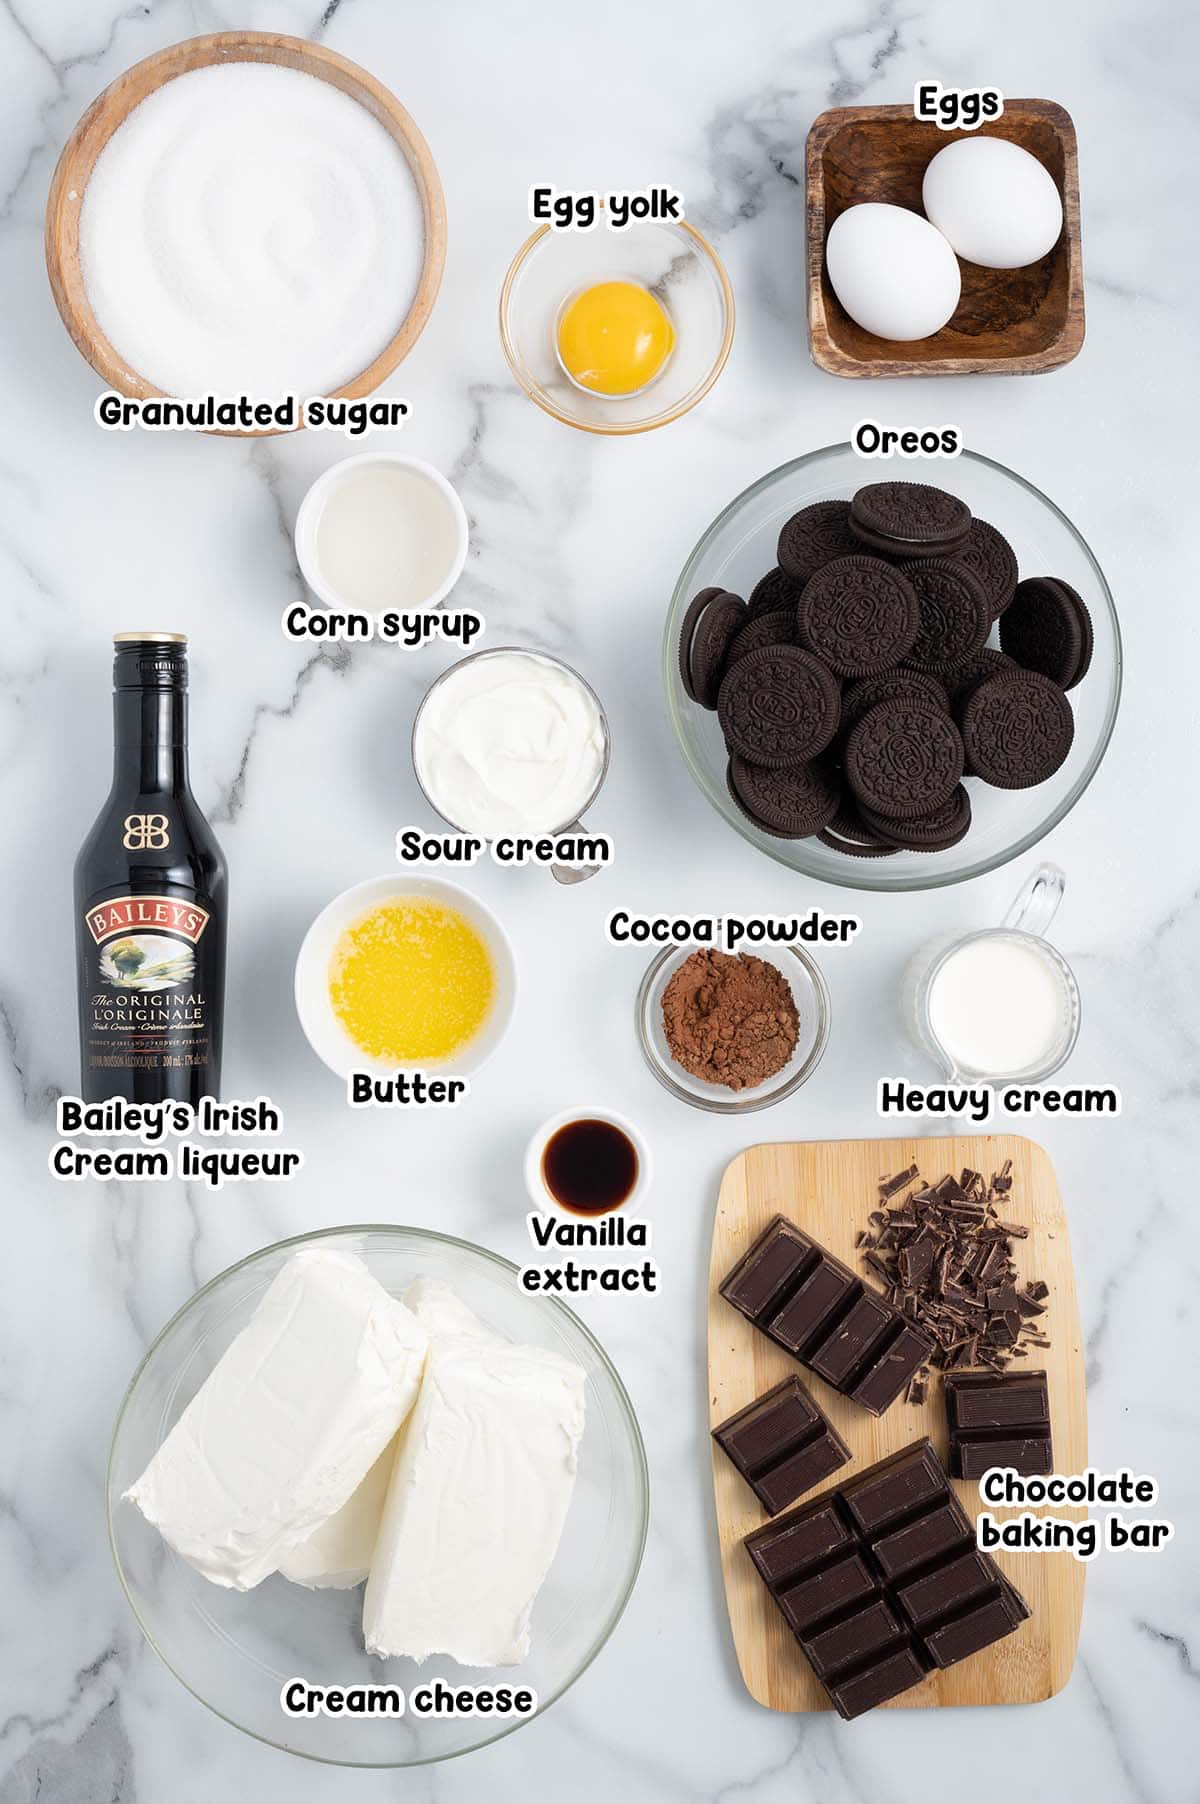 Bailey's Cheesecake ingredients.